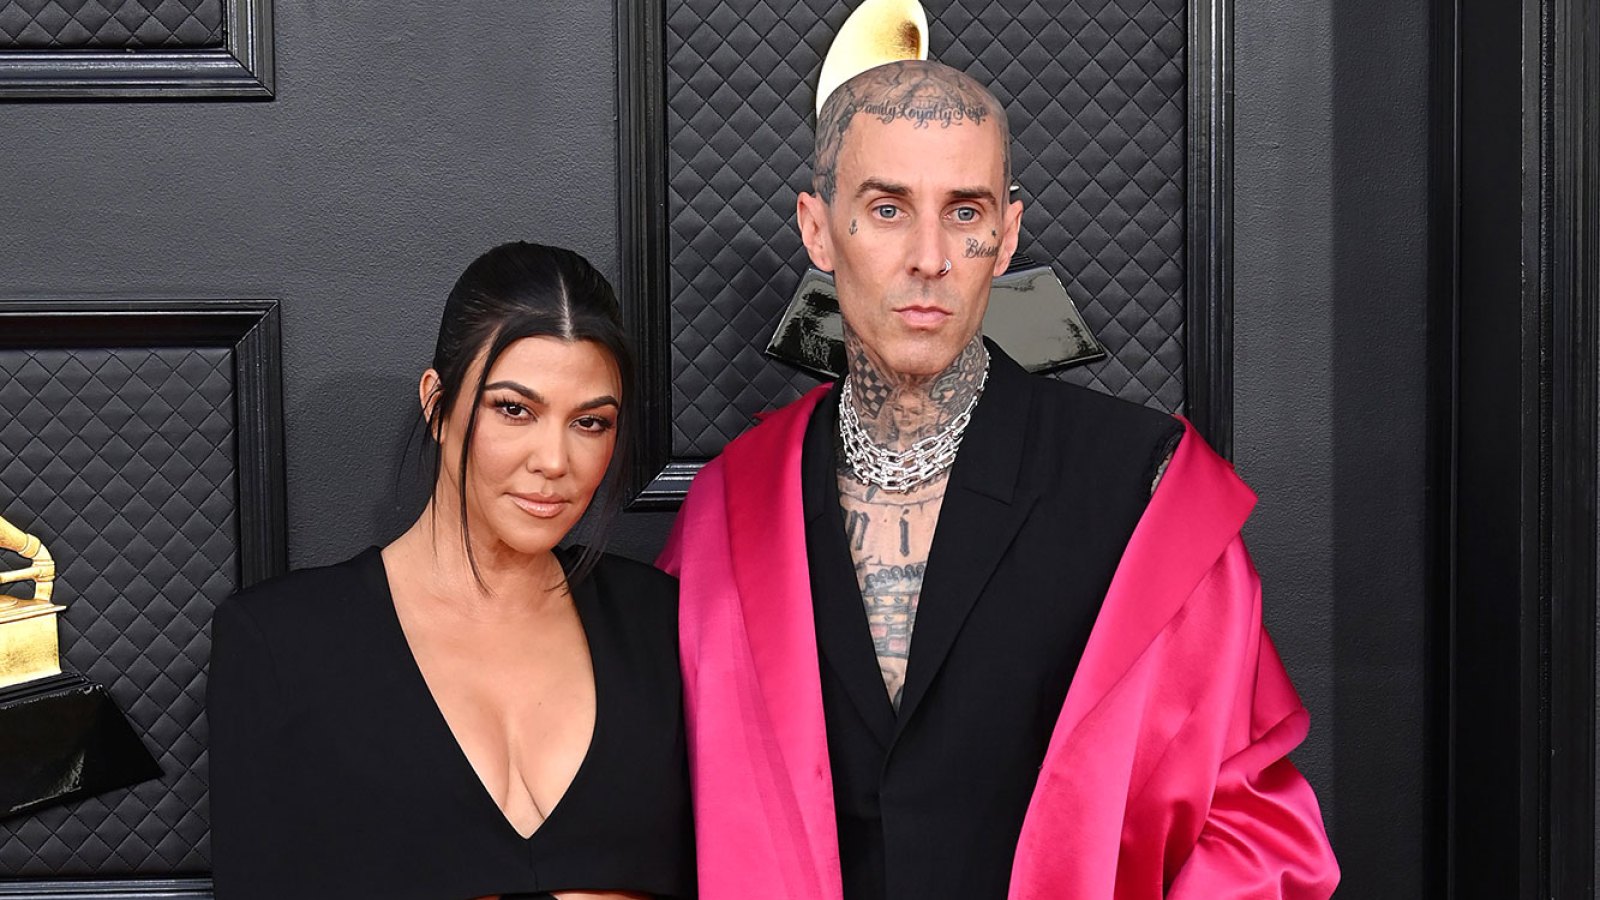 Kourtney Kardashian Honors Travis Barker Late Assistant Who Died in 2008 Plane Crash He Survived